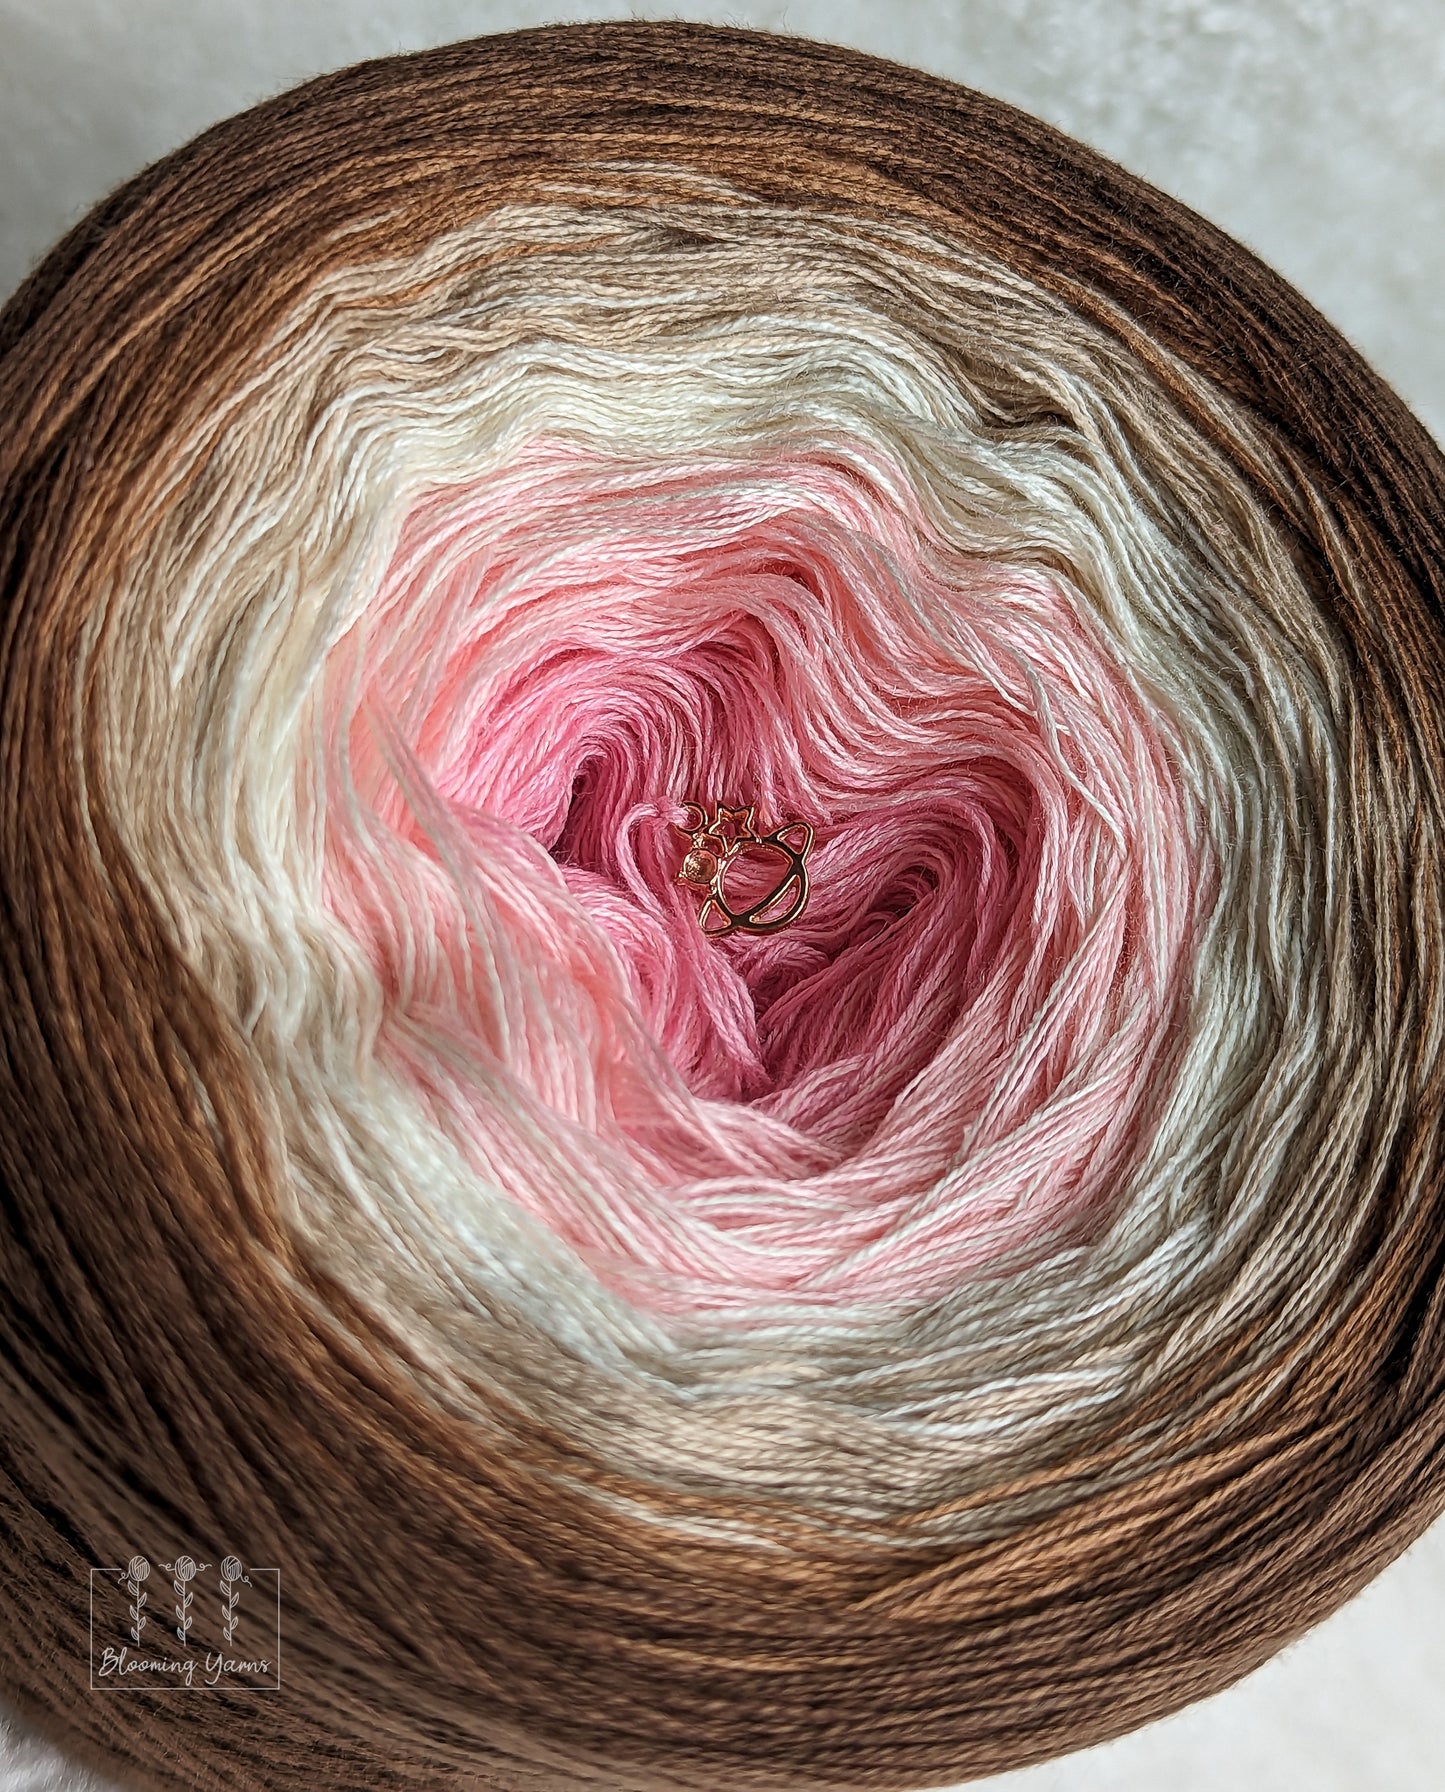 "Dark Palomino" gradient ombre yarn cake created by Ancy-Fancy